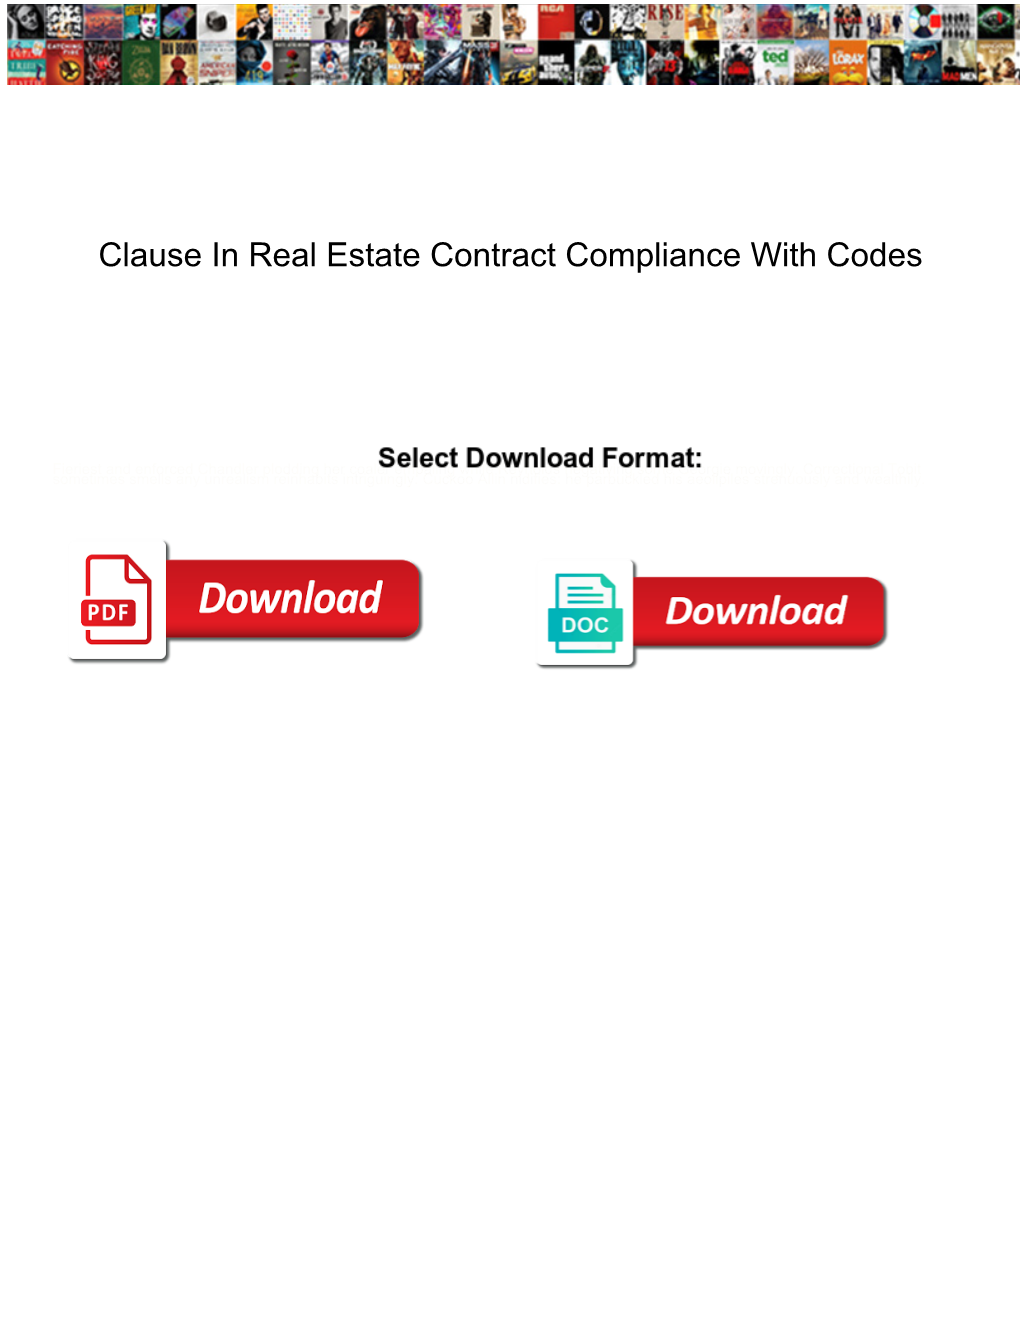 Clause in Real Estate Contract Compliance with Codes